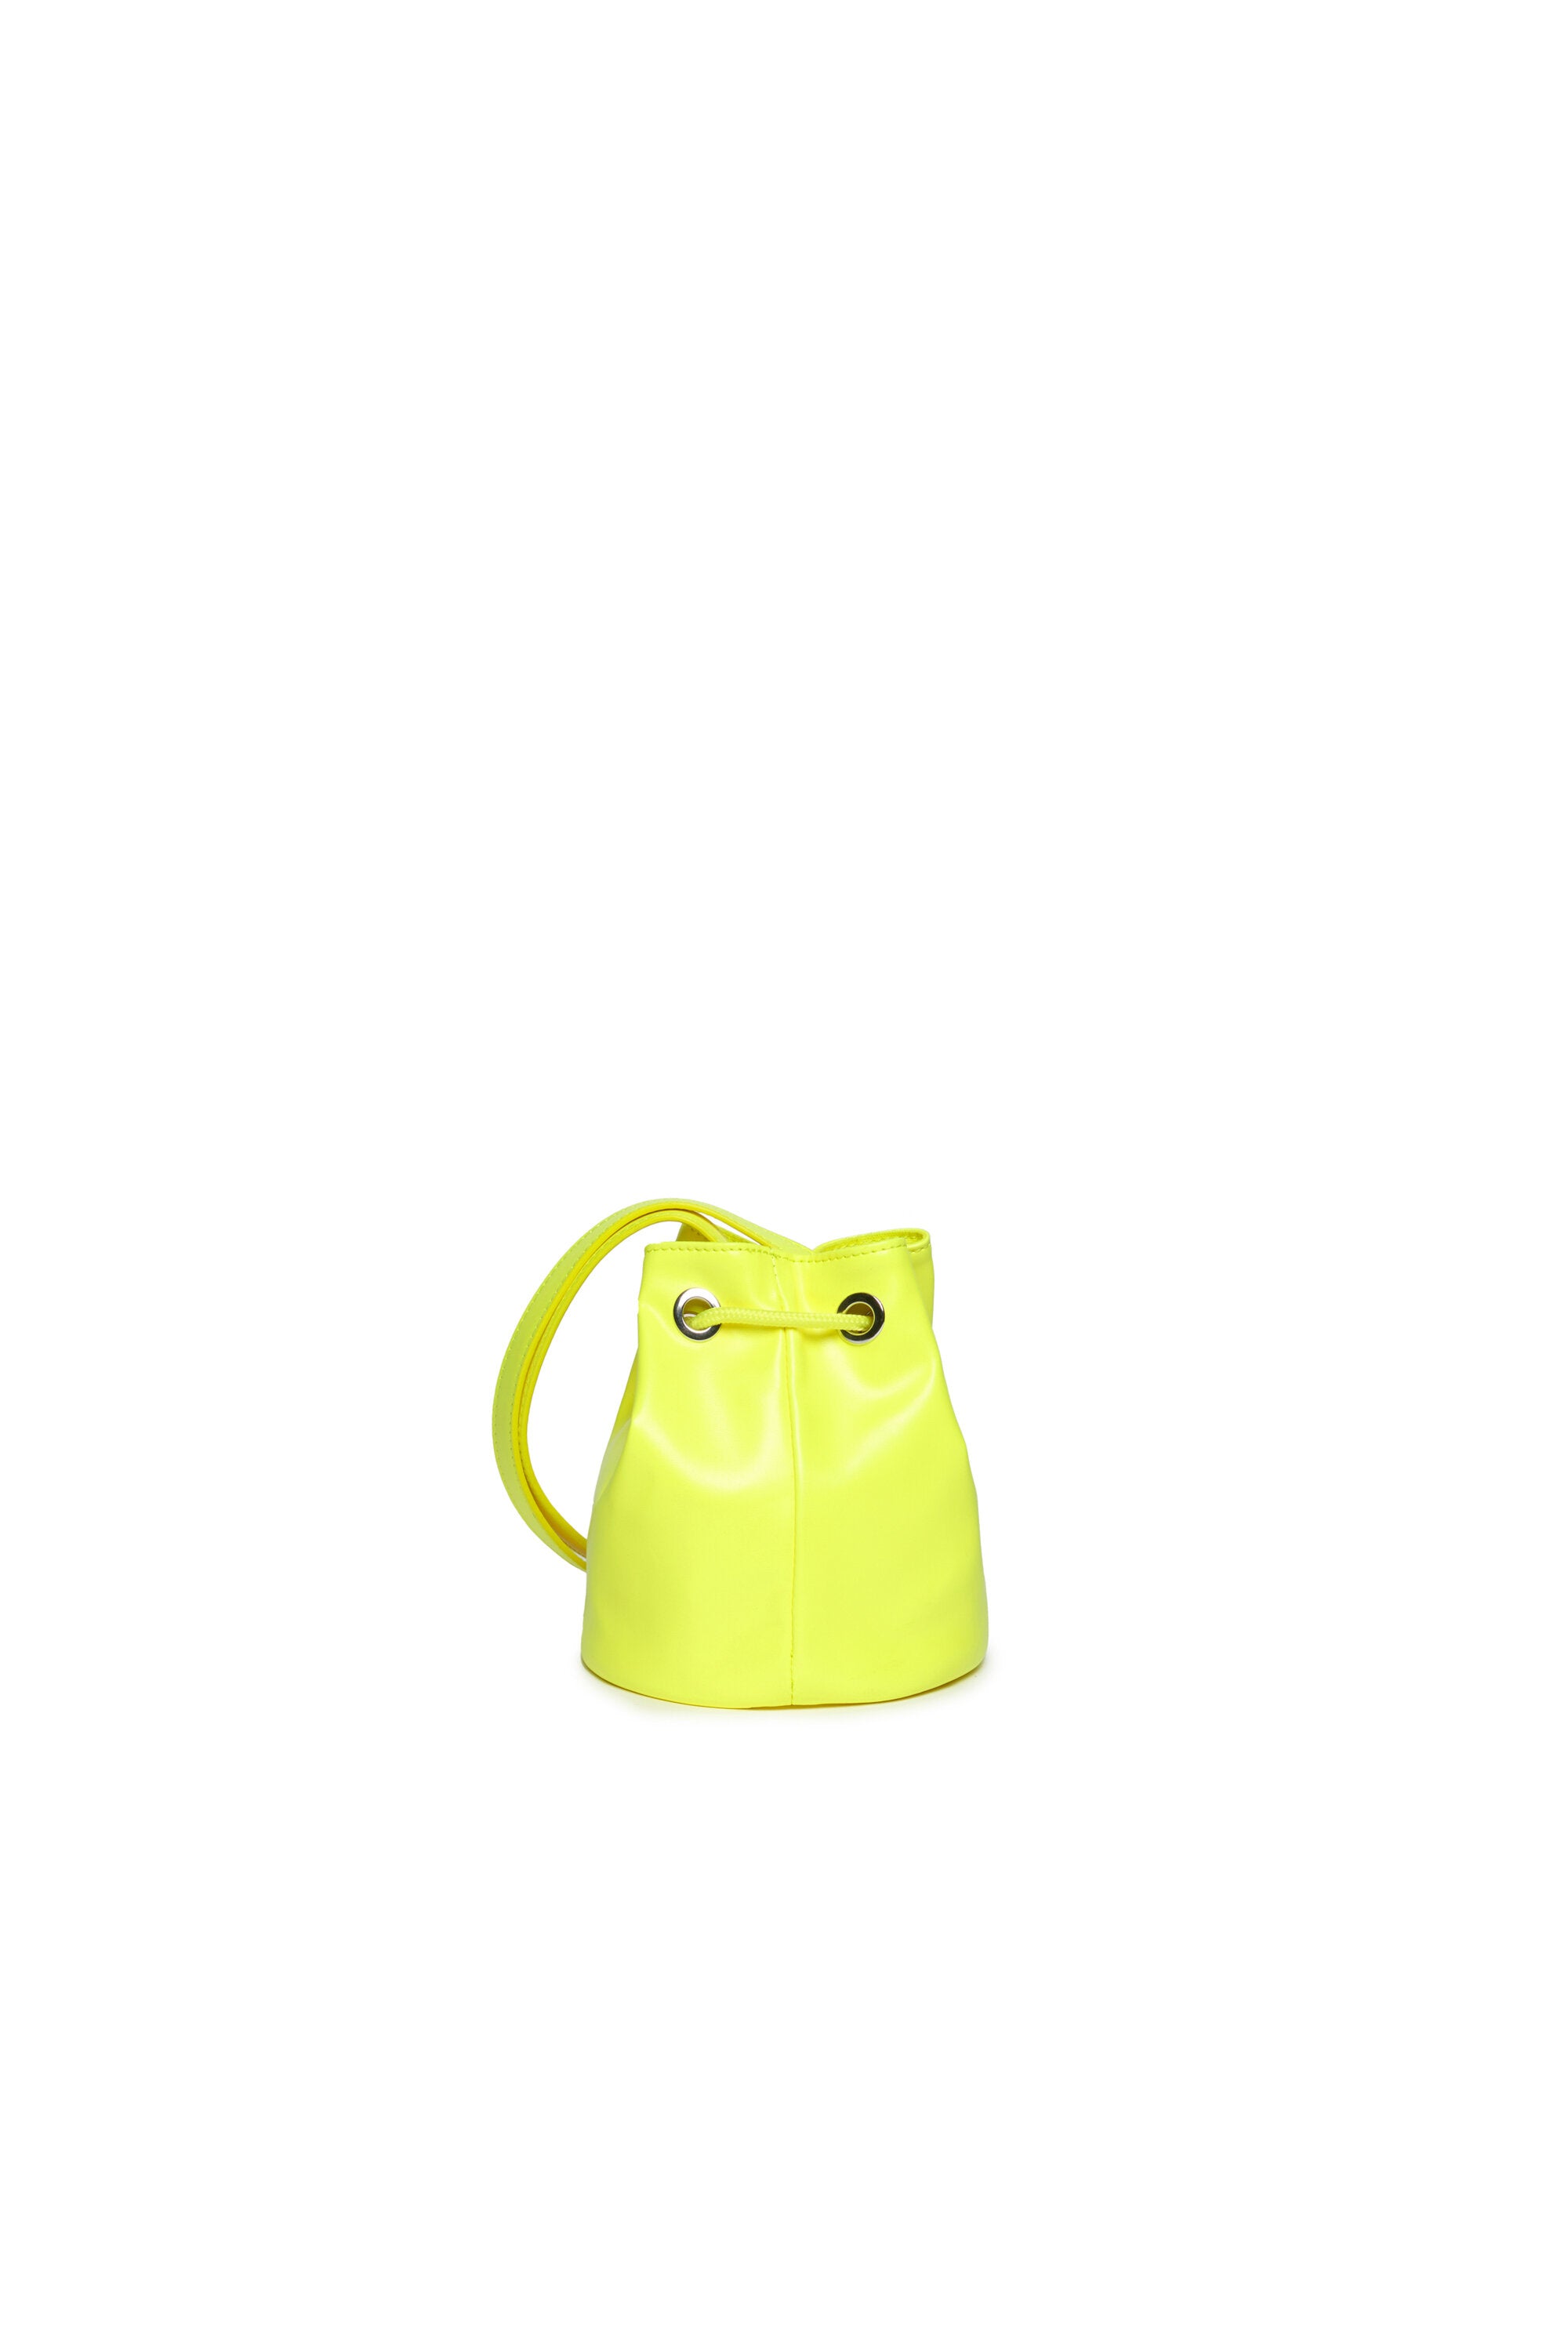 Wellty bag in fluo imitation leather